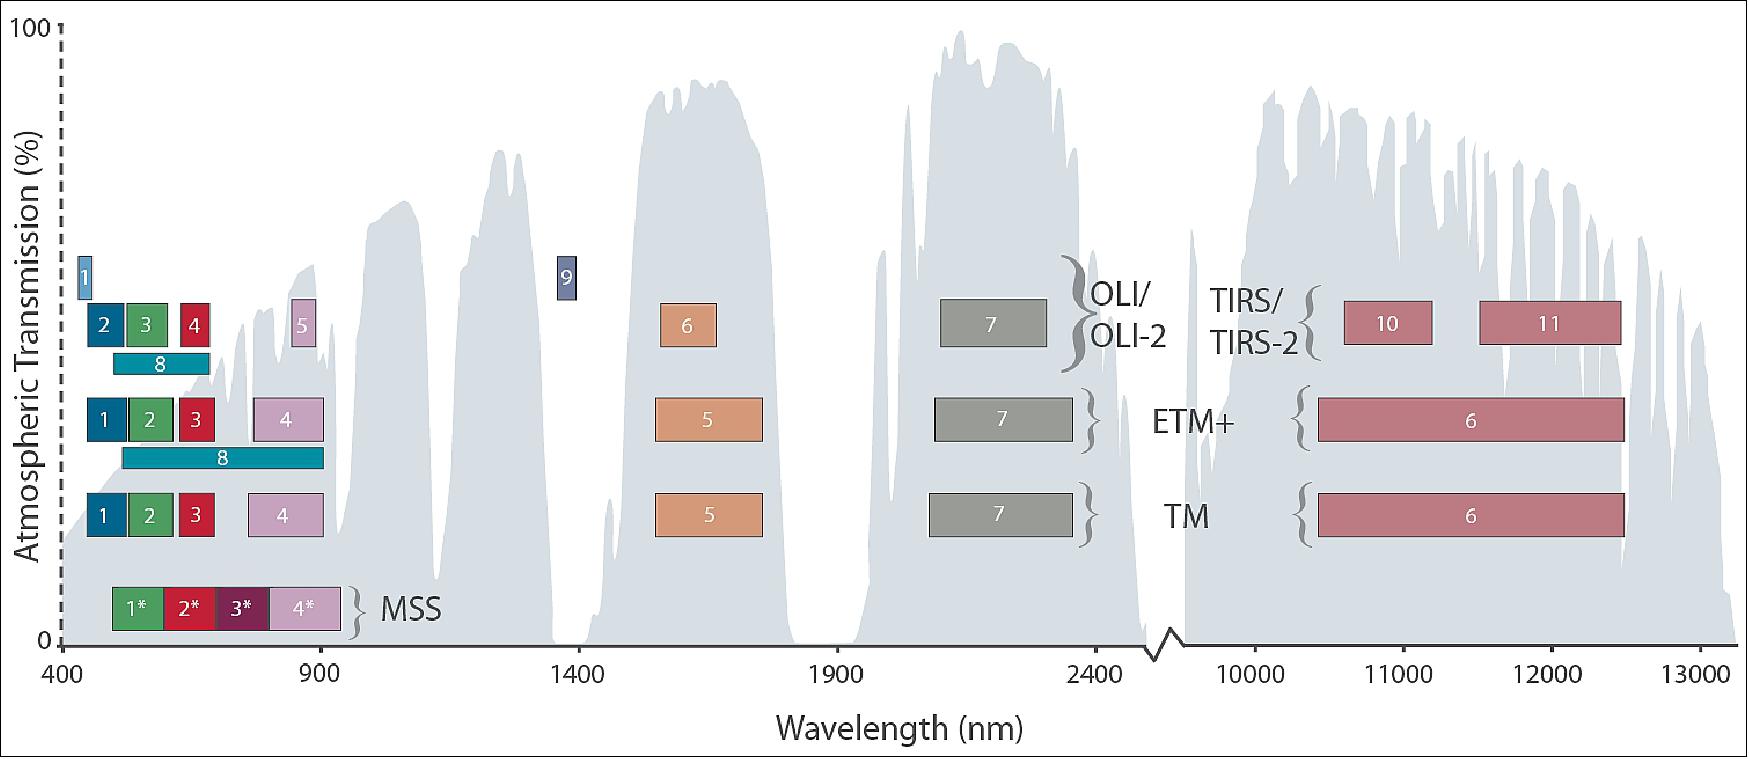 Figure 52: MSS aboard Landsats 1–5 had four bands. TM (Thematic Mapper) aboard Landsats-4 & -5 had seven bands. Landsat-7’s ETM+ (Enhanced Thematic Mapper Plus) has 8 bands and Landsats-8 &-9 have 11 bands. The atmospheric transmission values for this graphic were calculated using MODTRAN for a summertime mid-latitude hazy atmosphere (circa 5 km visibility), image credit: NASA